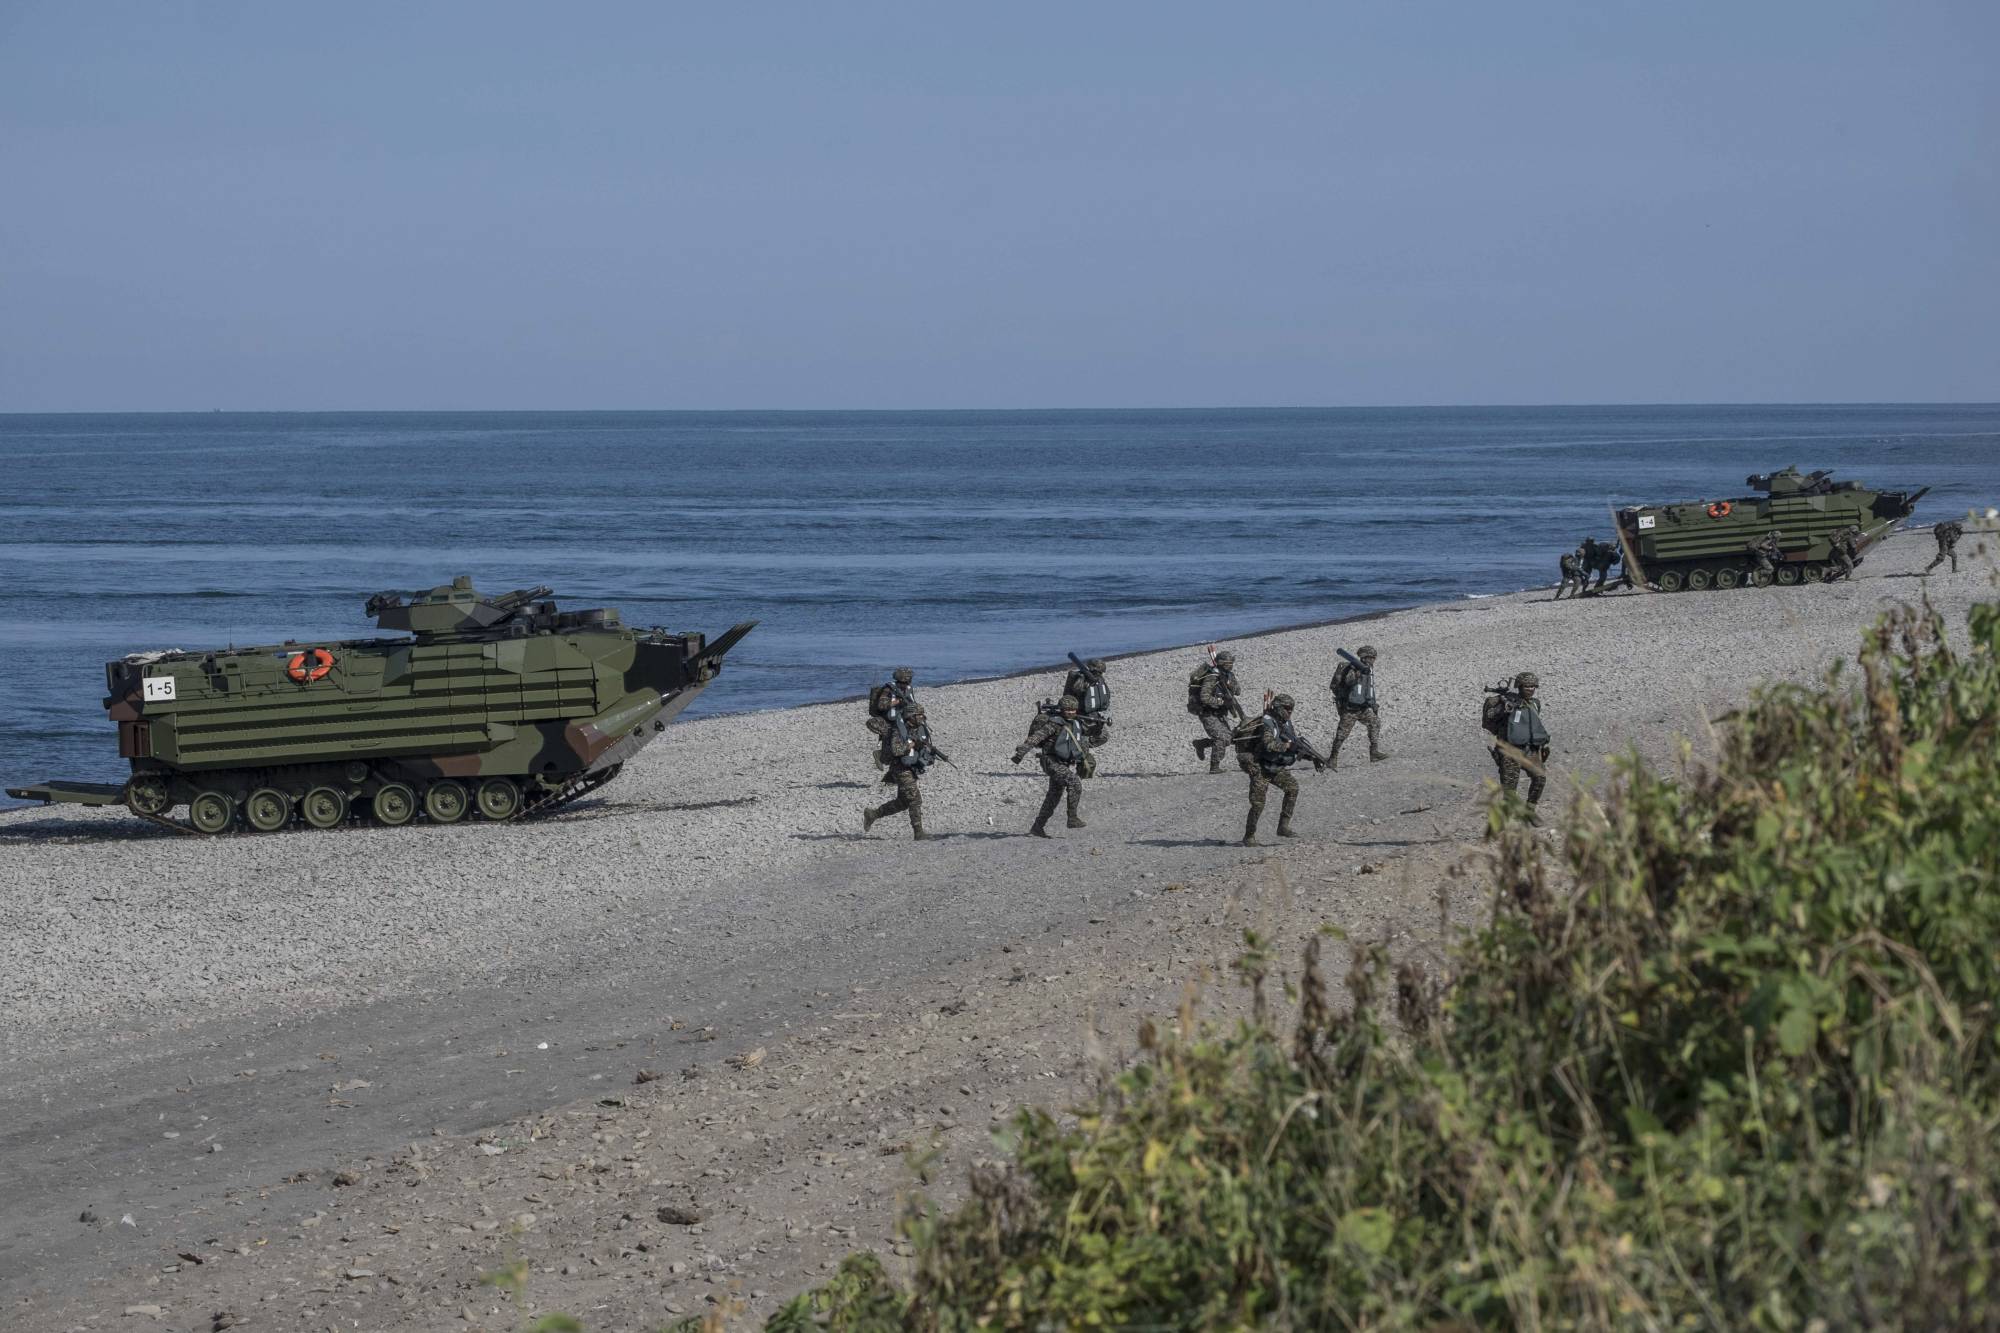 Taiwanese military personnel participate in an amphibious landing as part of military exercises in Pingtung, Taiwan, on July 28. | LAM YIK FEI / THE NEW YORK TIMES